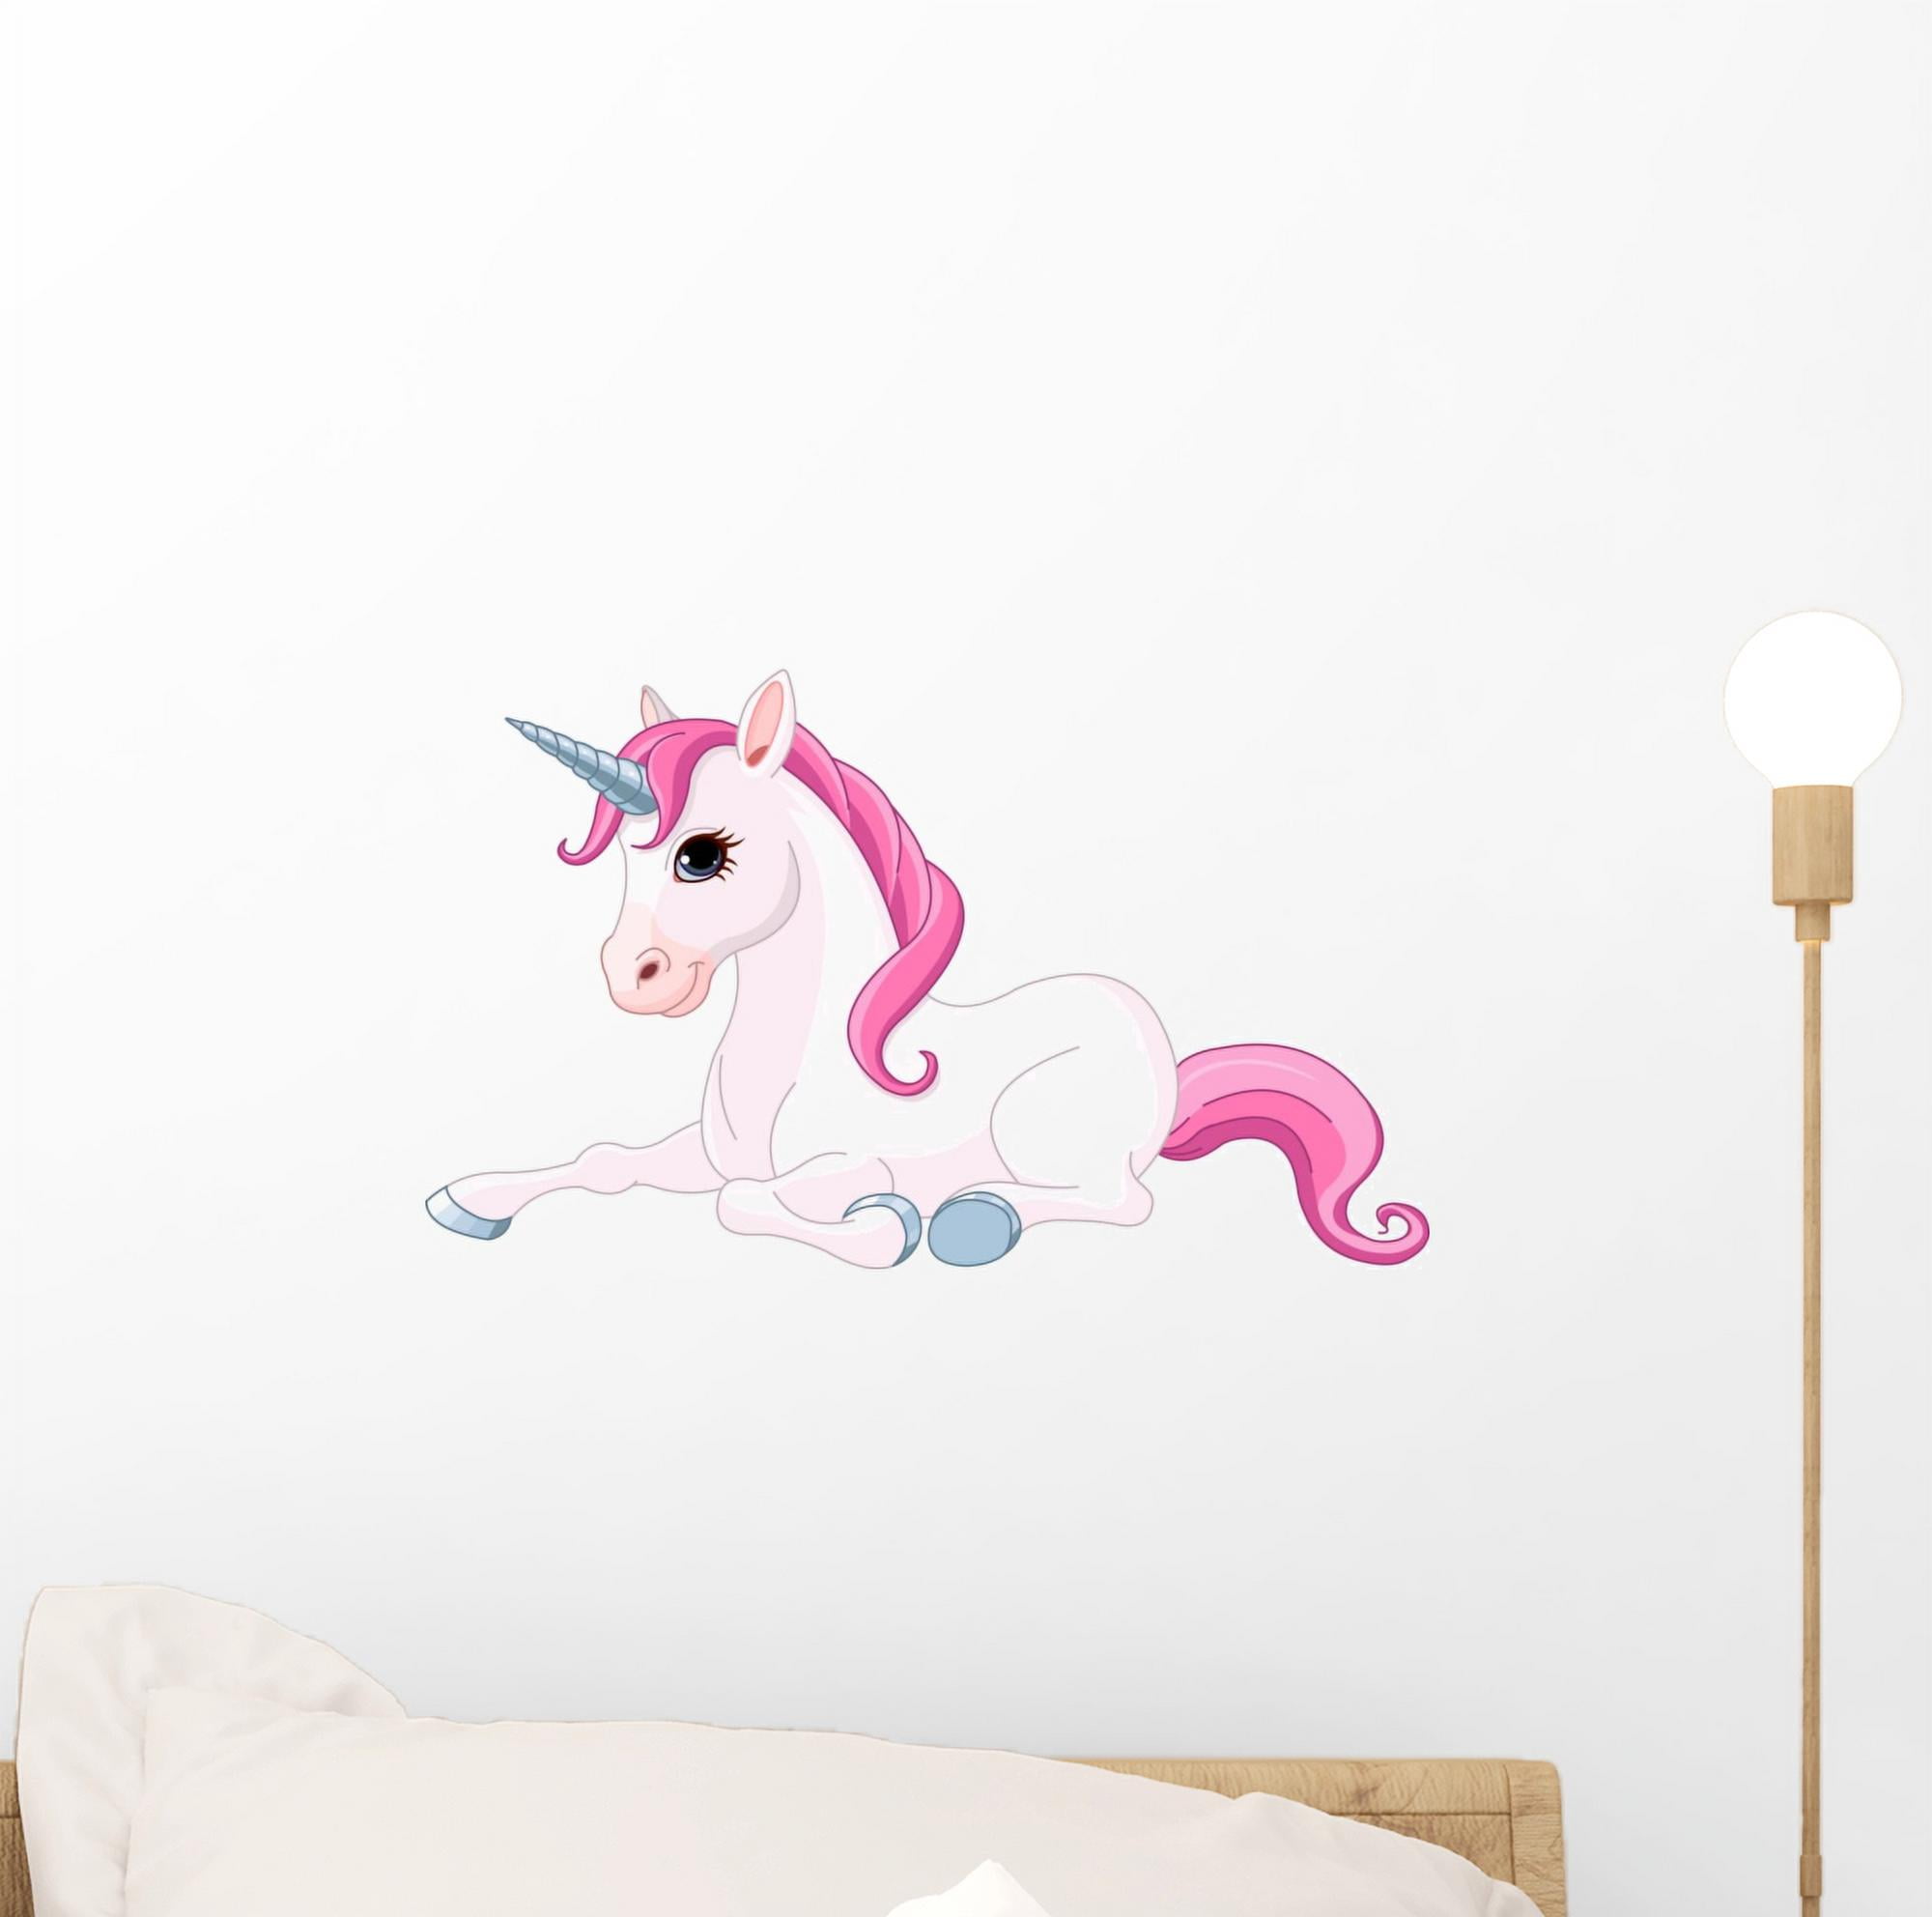 Adorable Unicorn Wall Decal Sticker by Wallmonkeys Vinyl Peel and Stick  Graphic for Girls (12 in W x 7 in H)